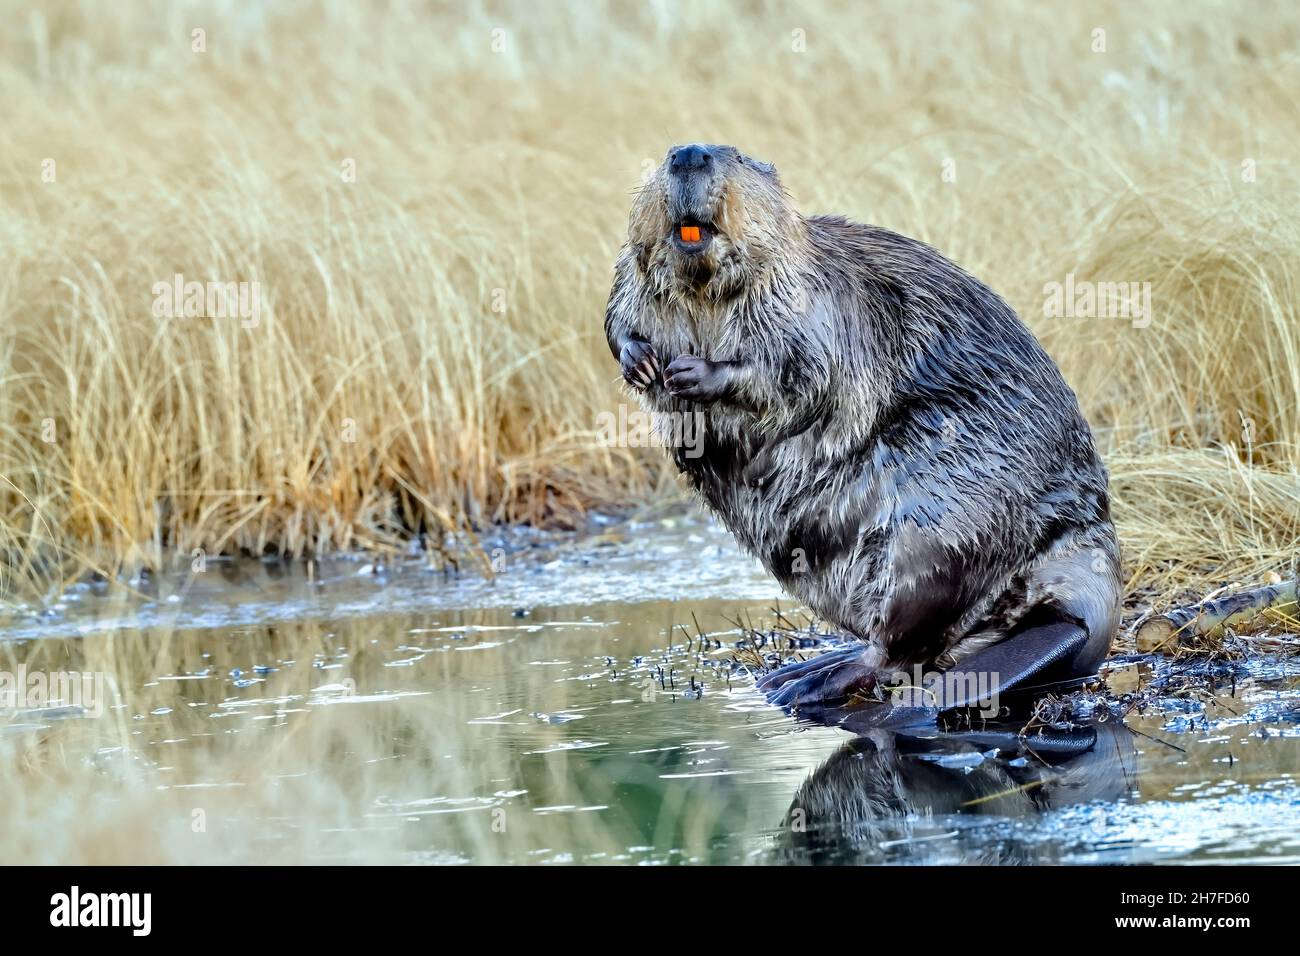 An adult beaver 'Castor canadensis', standing on his rear legs for a better view of his surroundings at his beaver pond in rural Alberta Canada Stock Photo